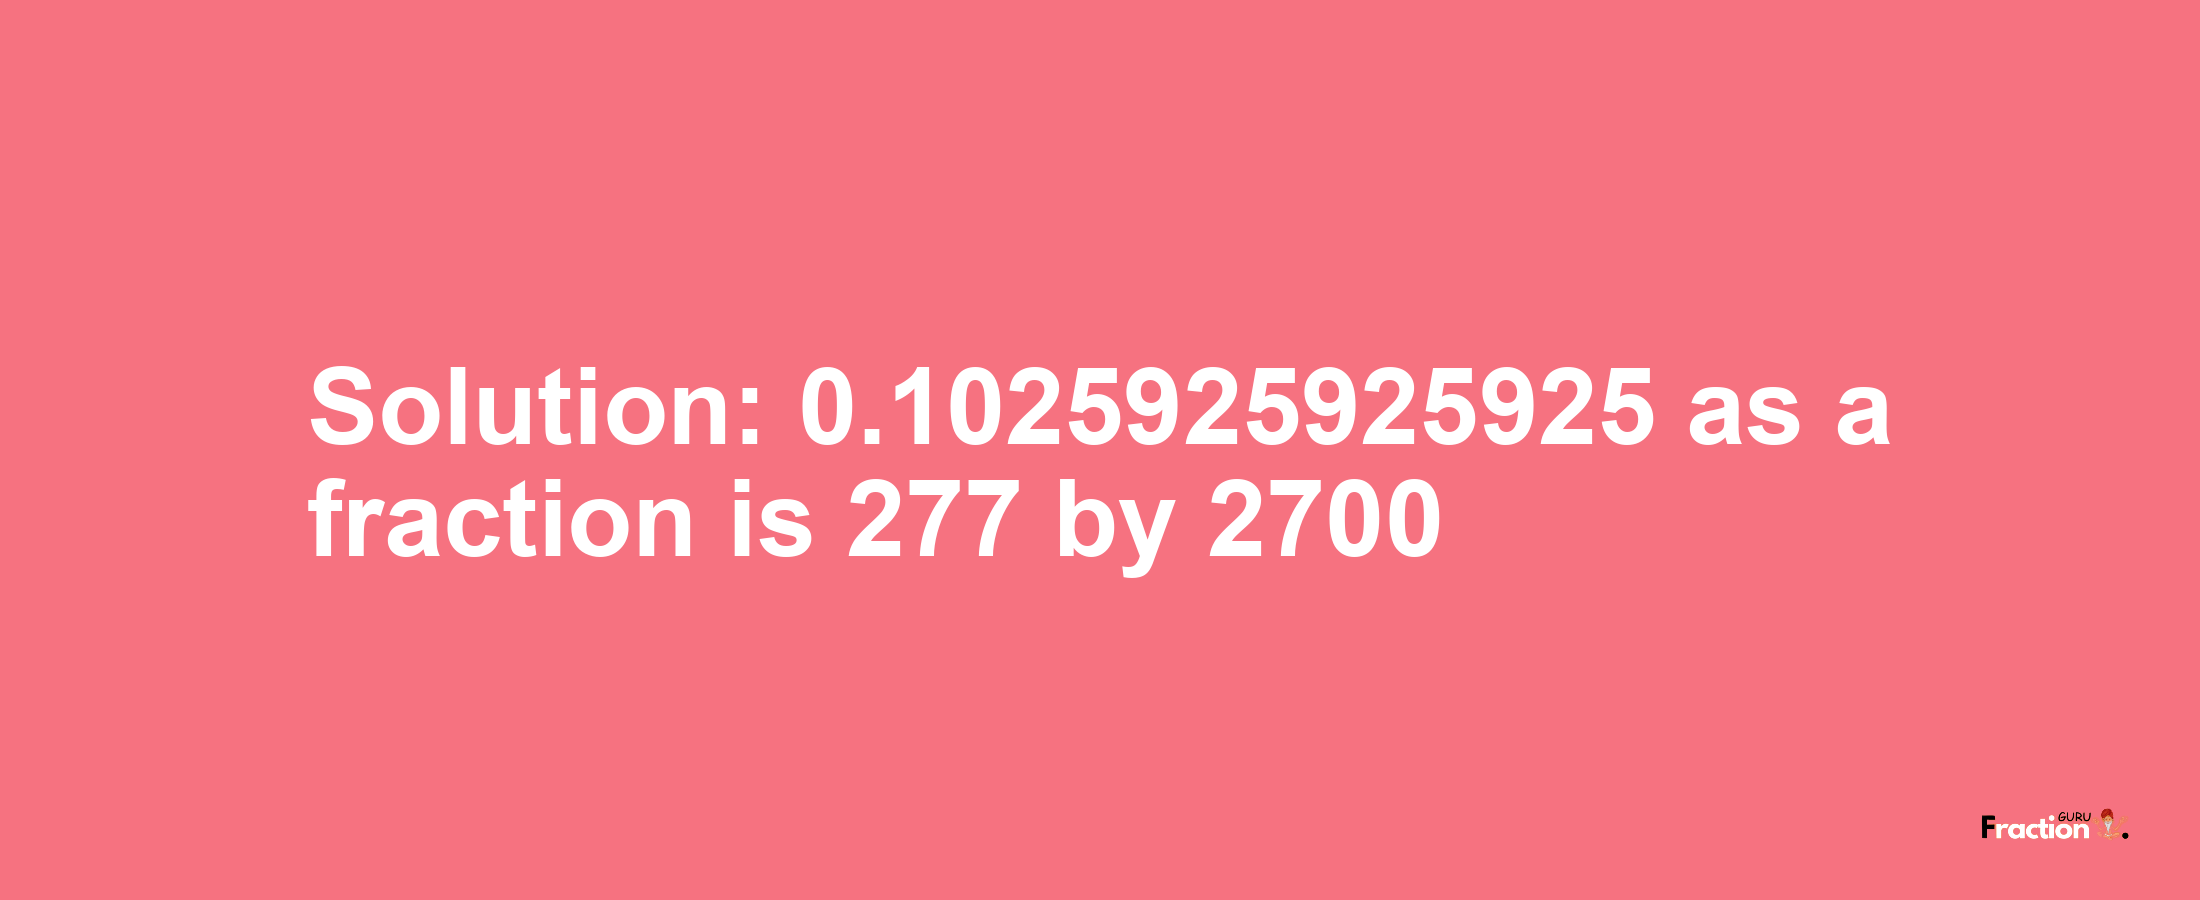 Solution:0.1025925925925 as a fraction is 277/2700